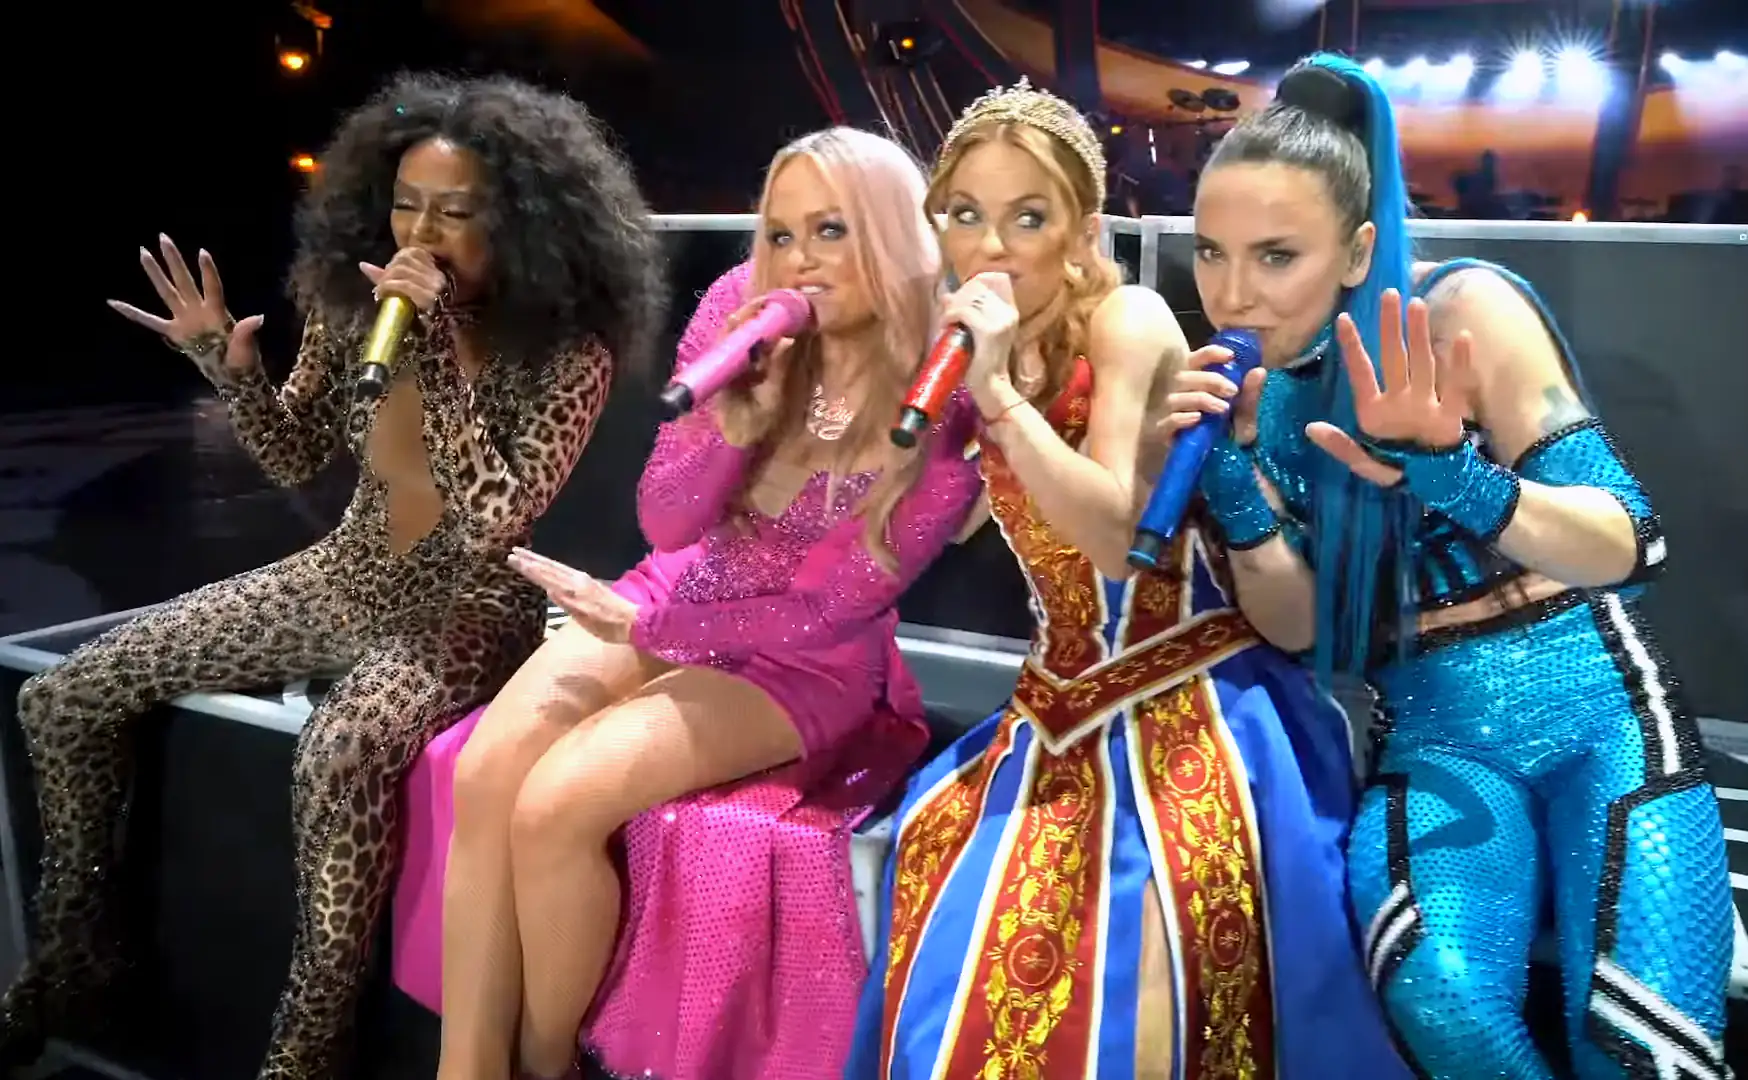 Spice girls performing